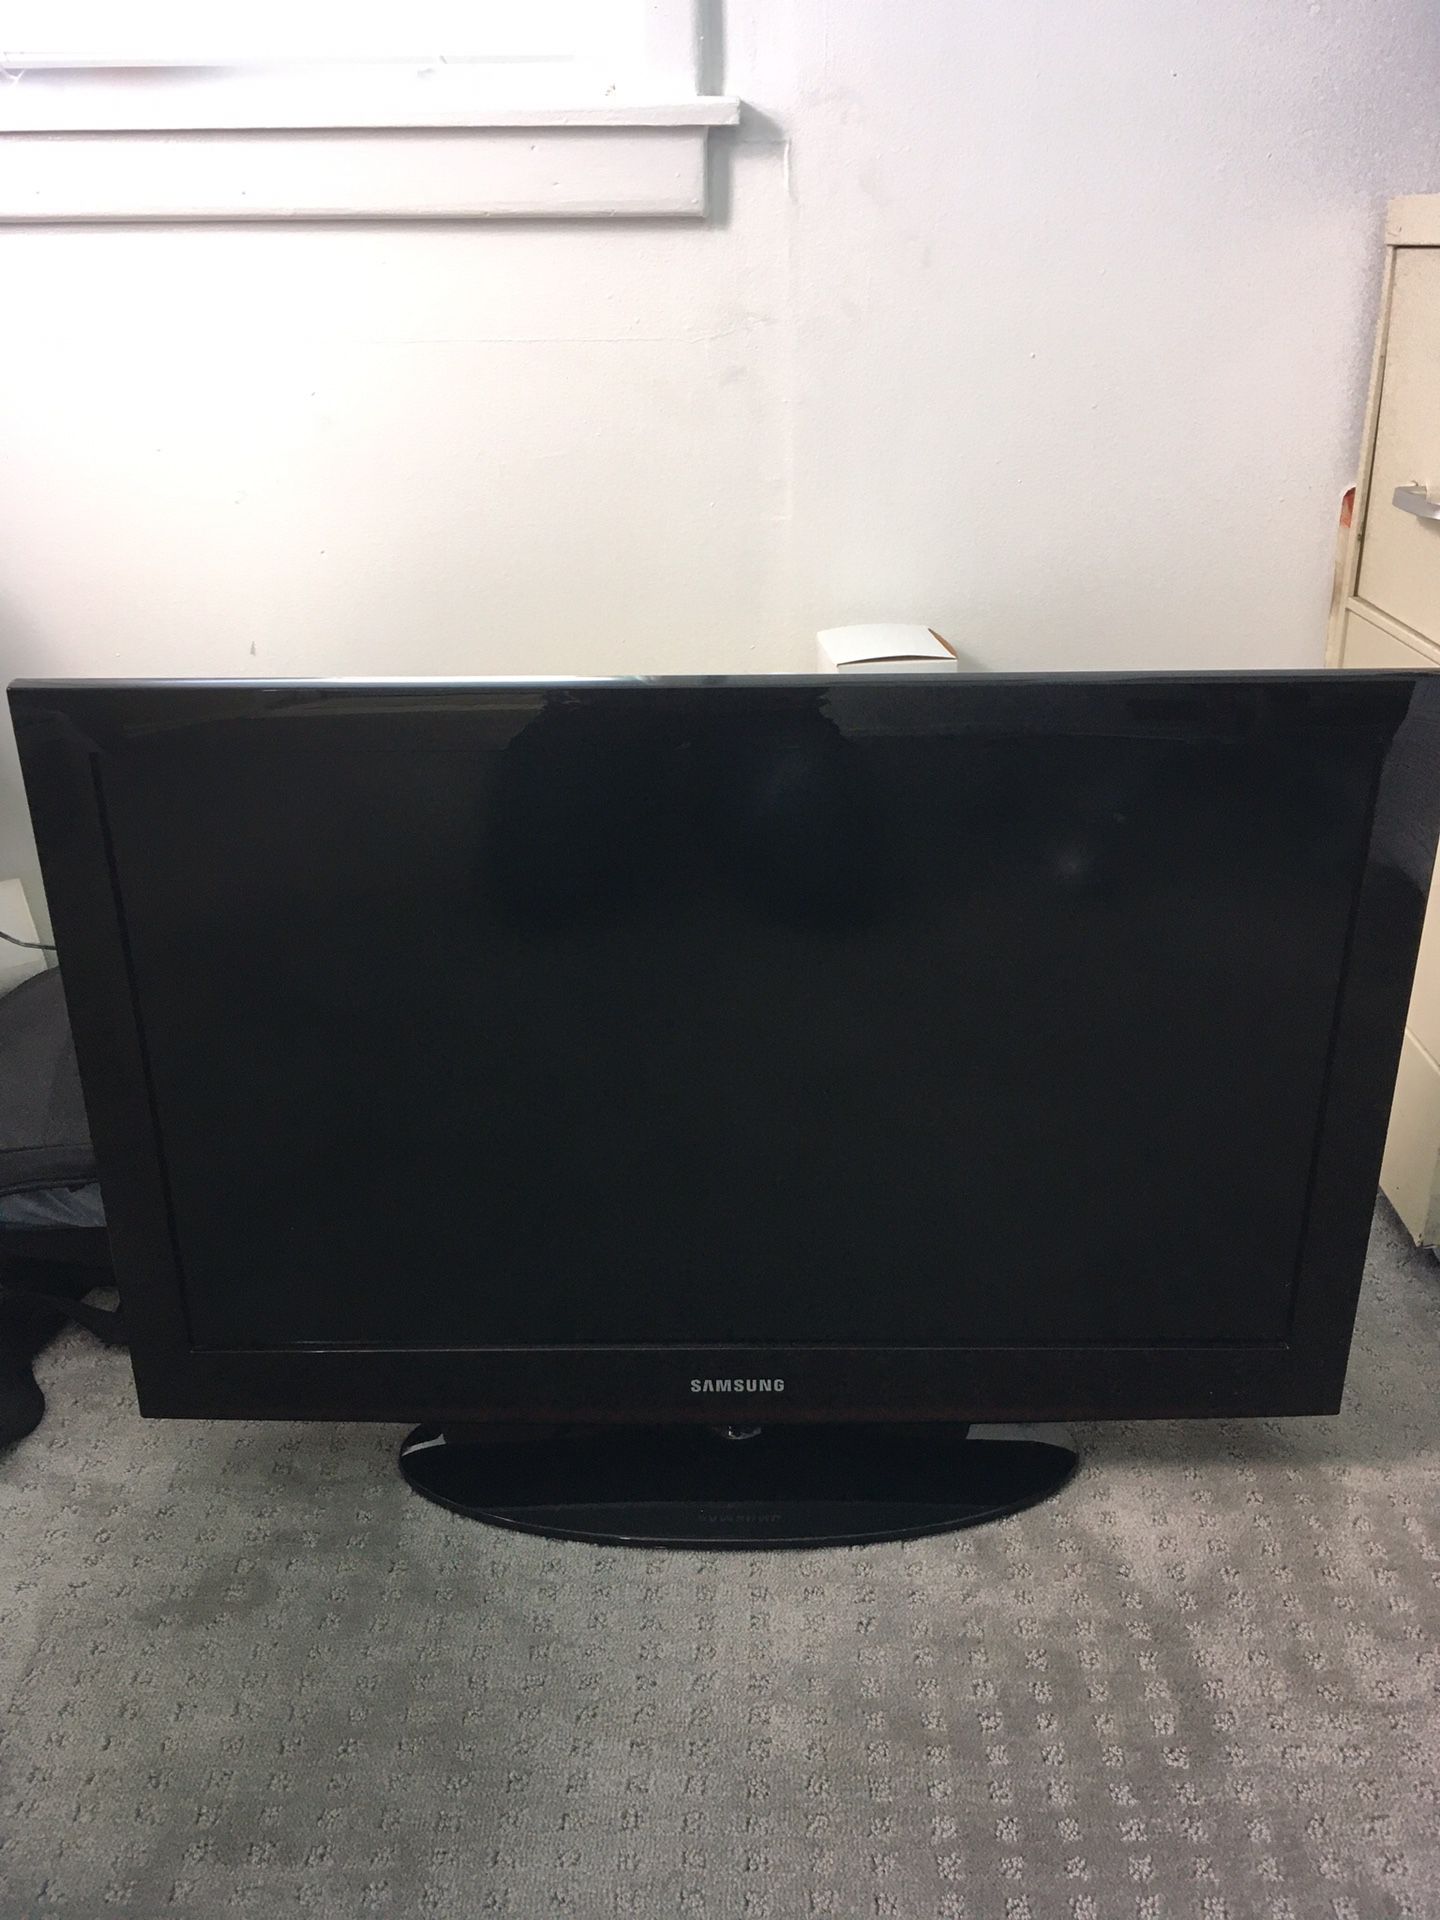 32 “ Samsung TV with remote